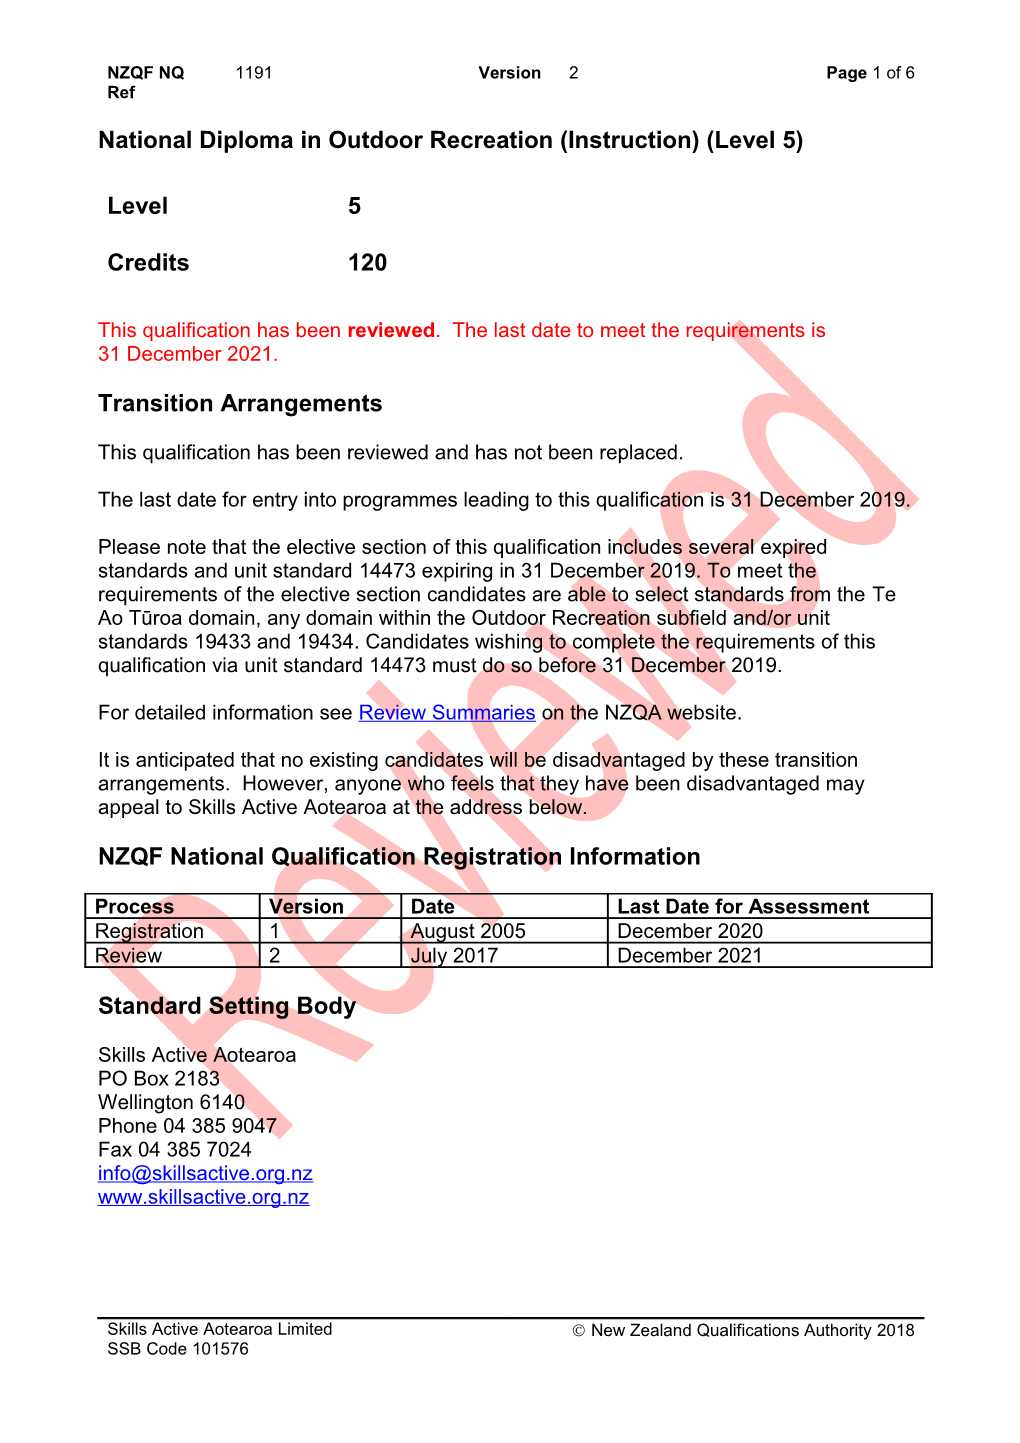 1191 National Diploma in Outdoor Recreation (Instruction) (Level 5)